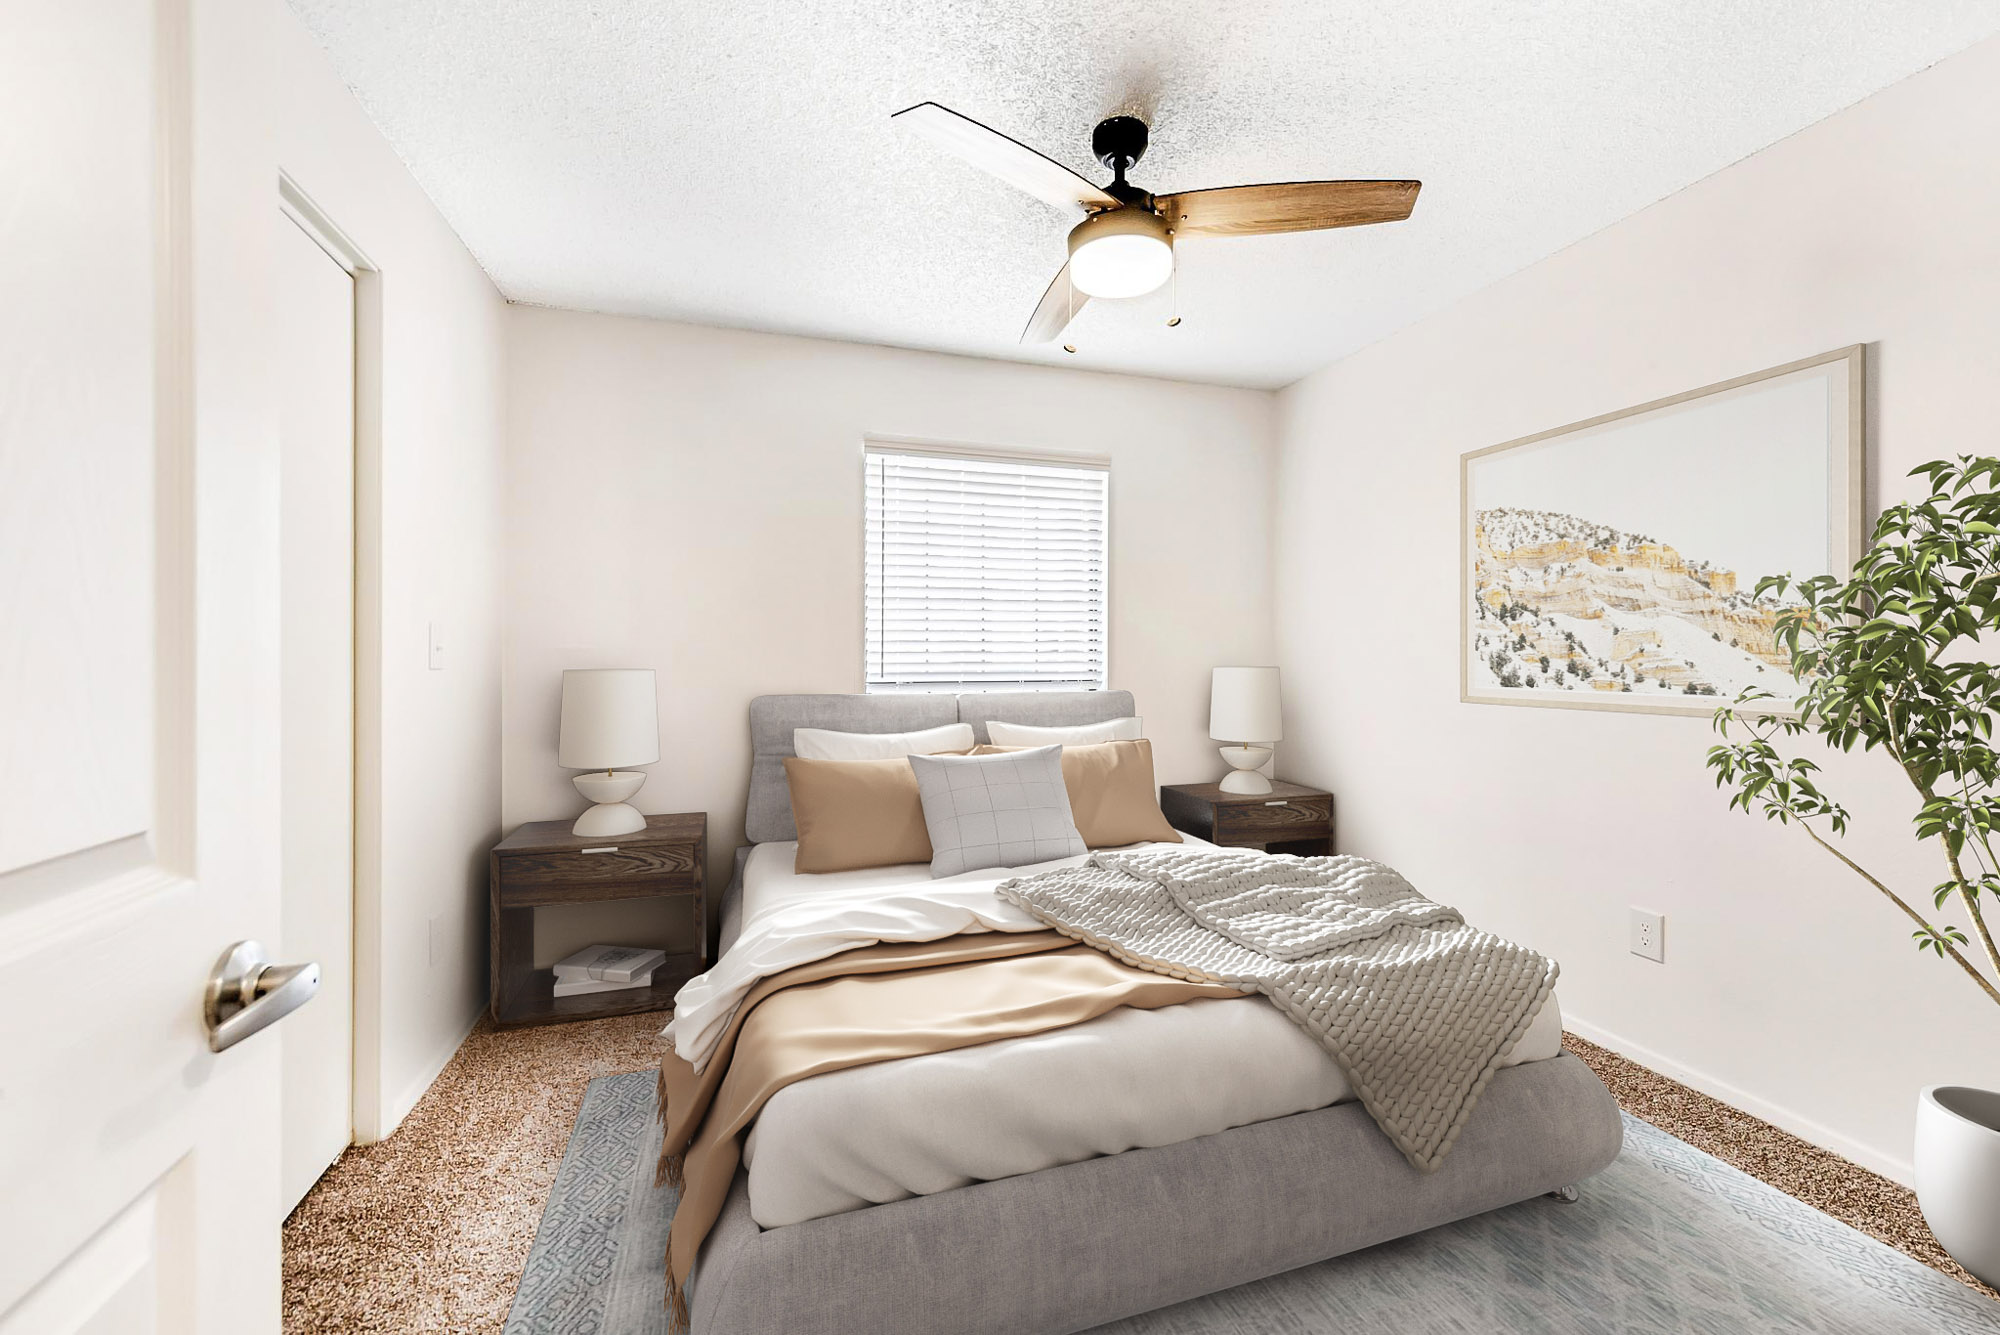 A bedroom at Canyon Chase apartments in Westminster, CO.